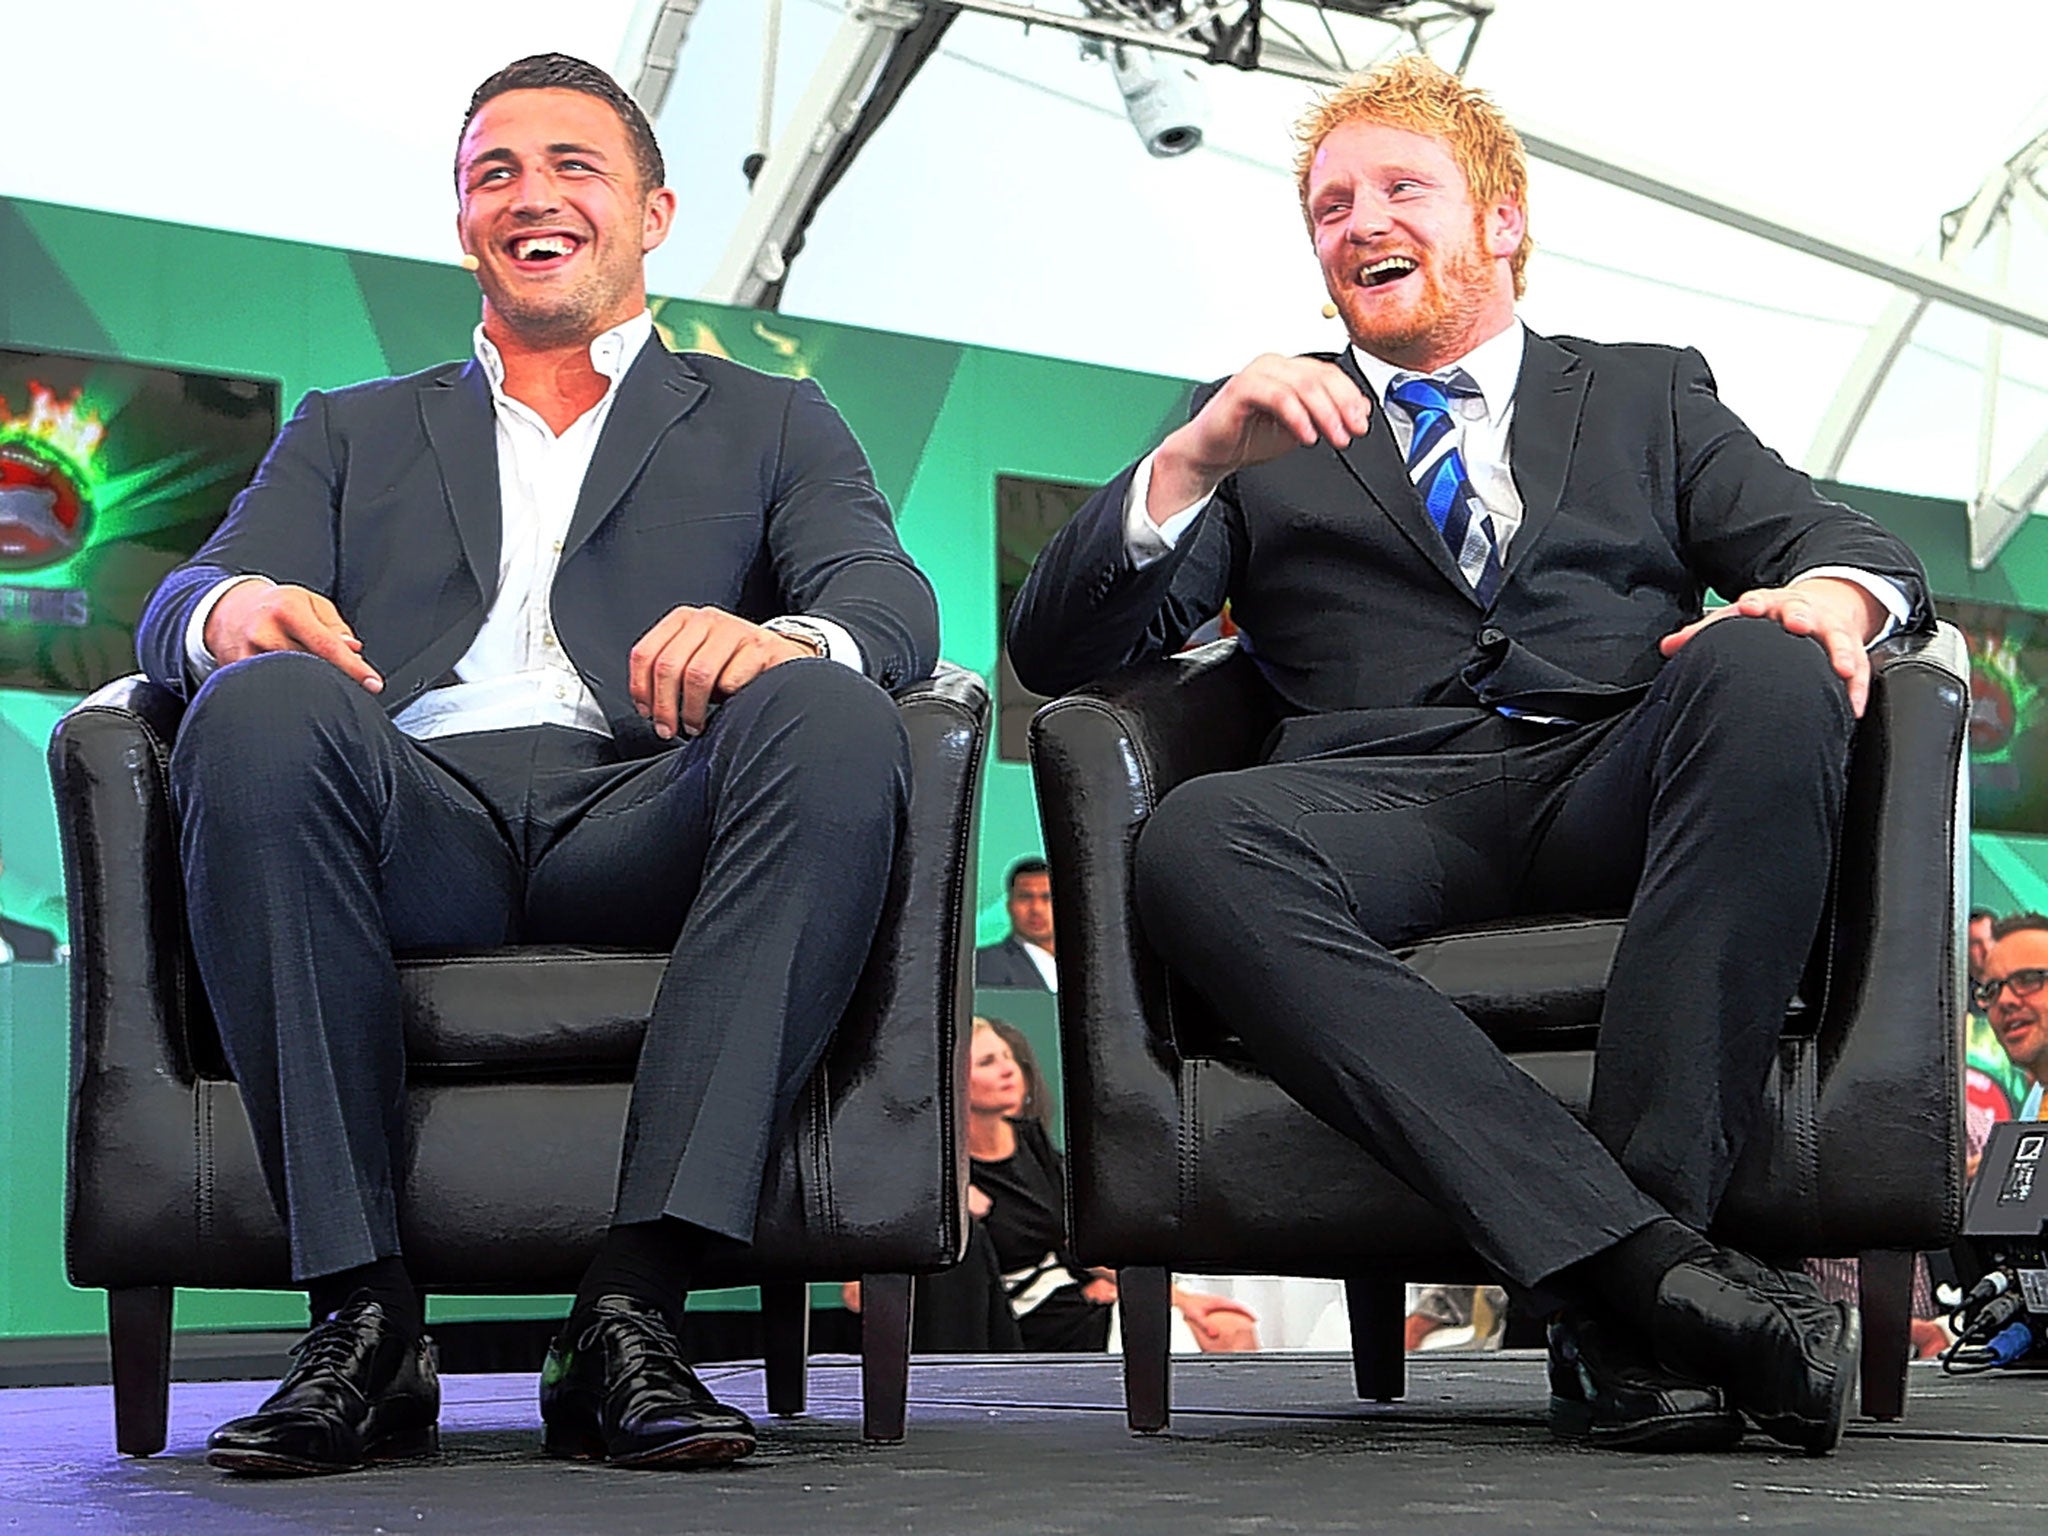 Sam Burgess (left) and James Graham are interviewed during the NRL Grand Final lunch in Sydney on Thursday